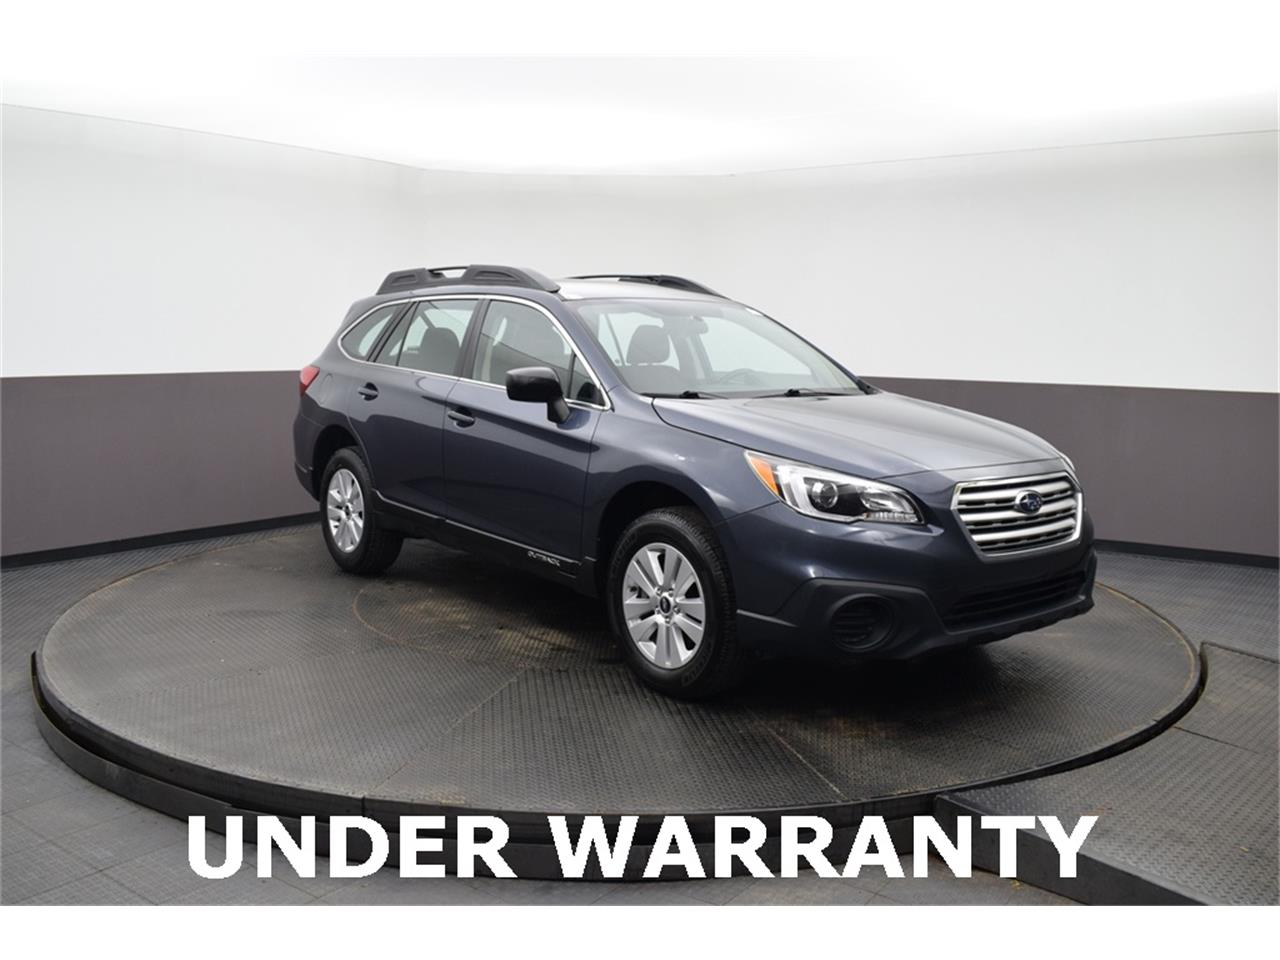 2017 Subaru Outback for sale in Highland Park, IL